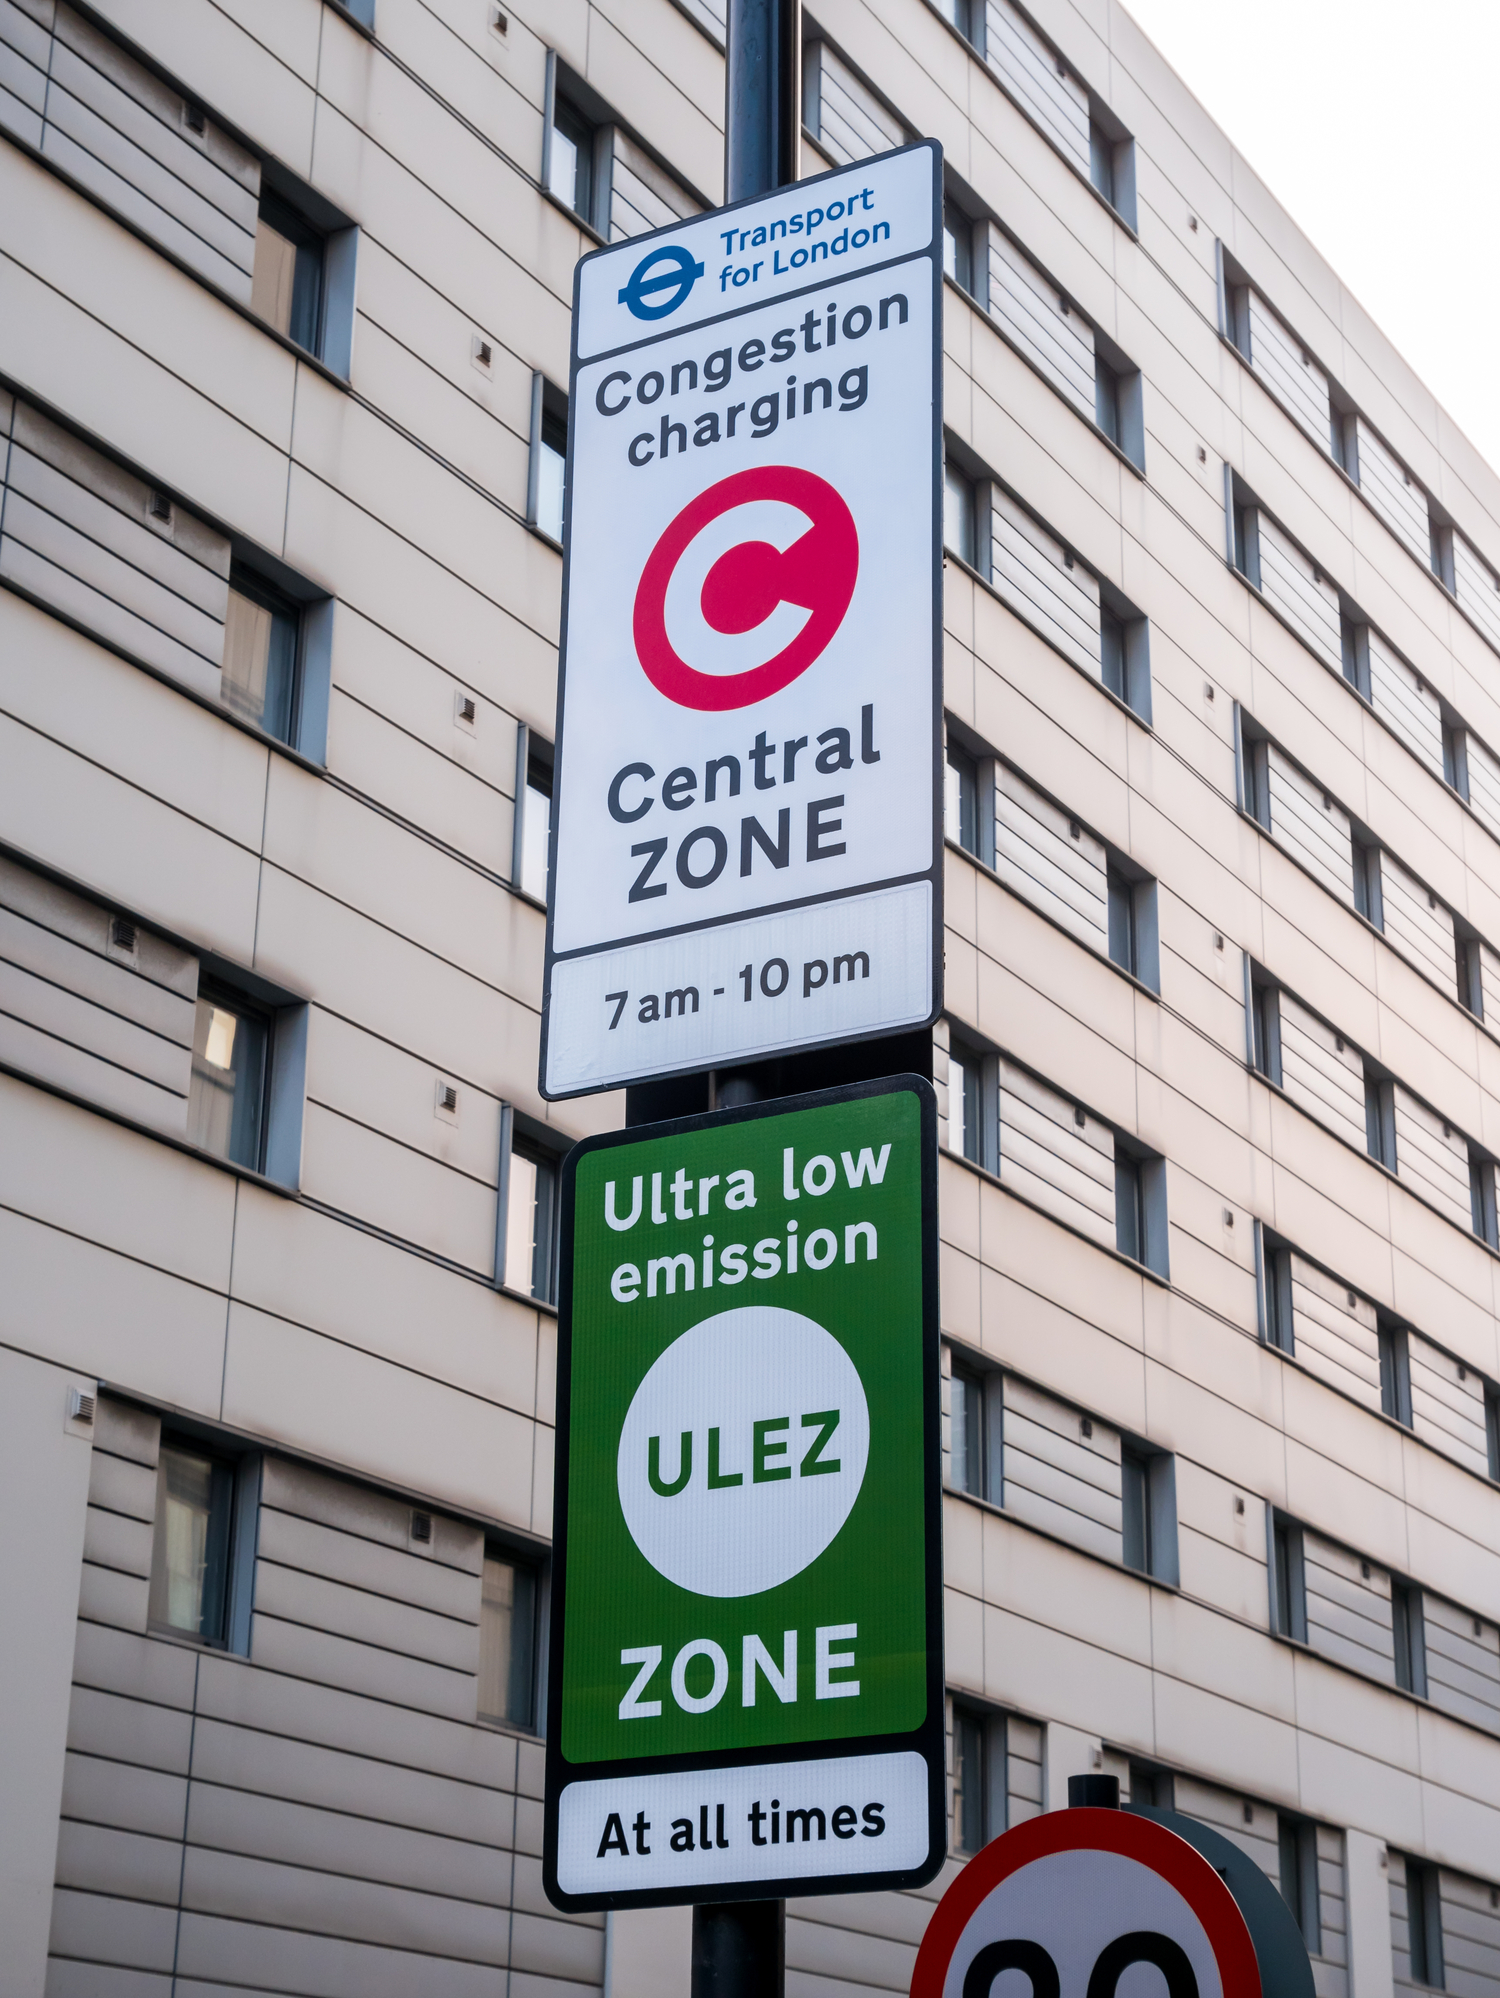 New road signs for congestion charging zones and green Ultra low emission zones